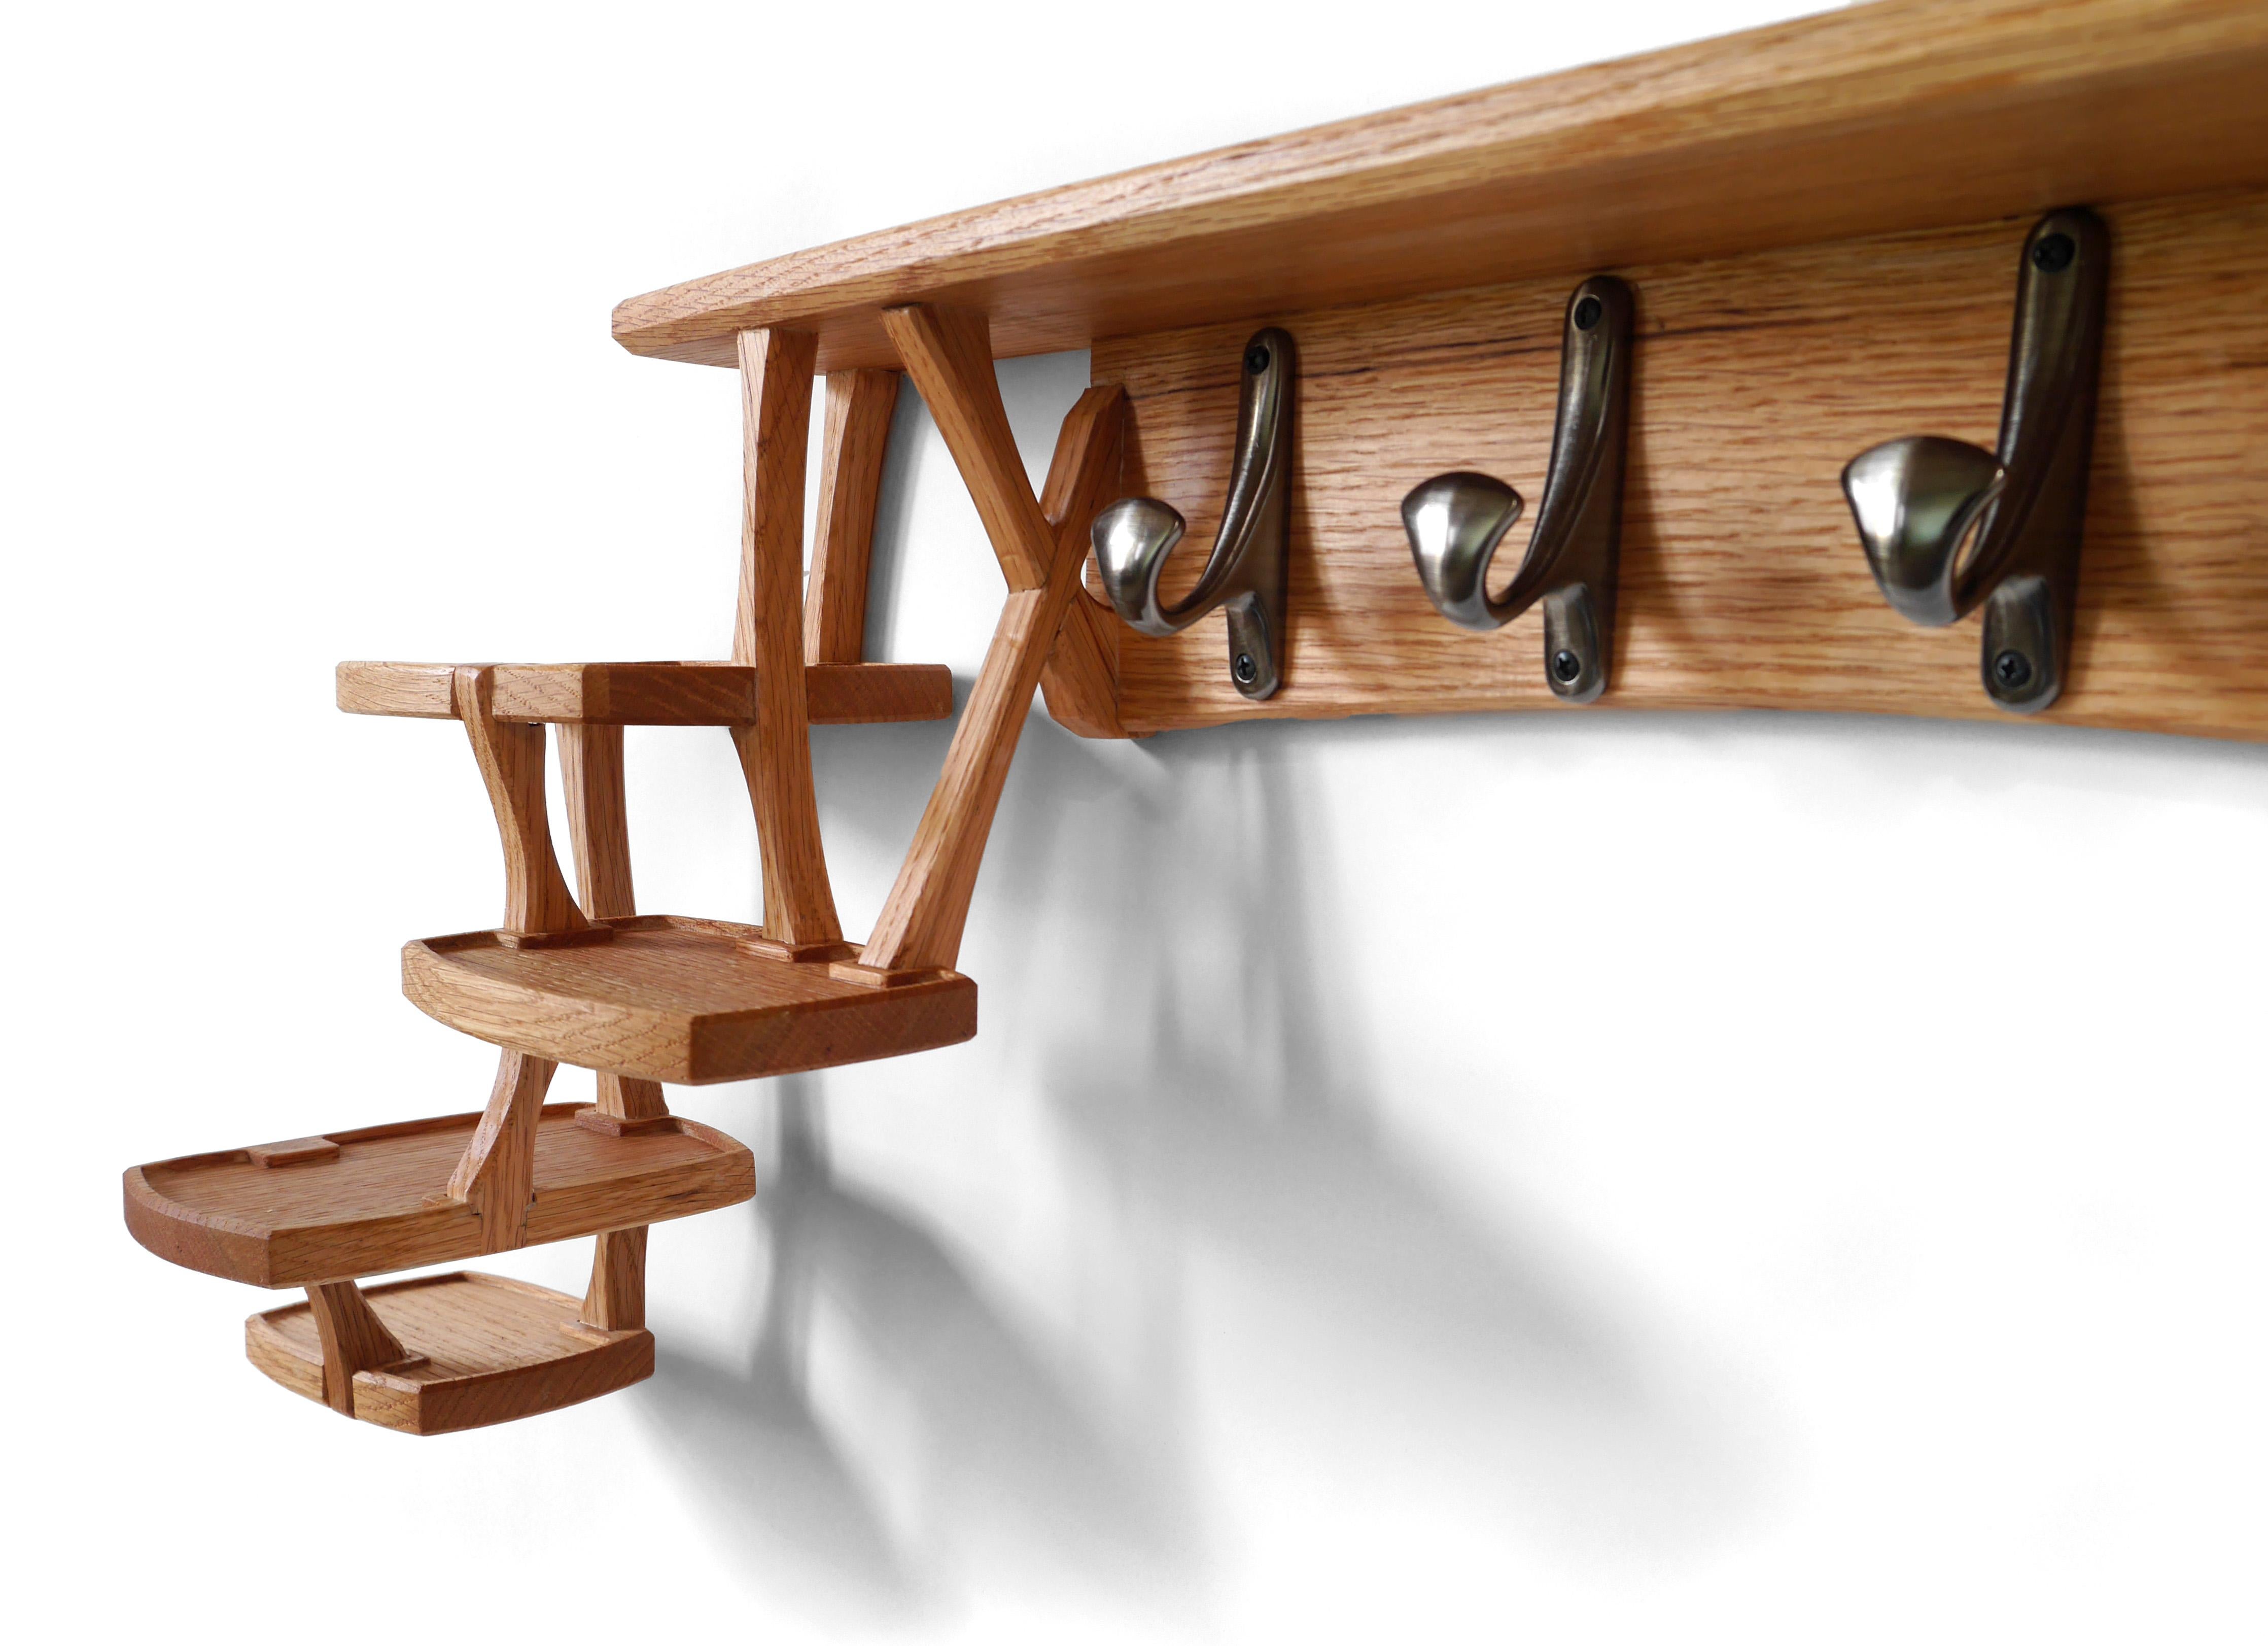 The Cirrus Coat Rack is wall mounted with seven hooks for coats, hats, or backpacks, and a series of small shelves for keys, a wallet, or whatever tools or accouterments you take with you into the world. It’s made out of solid oak hardwood and built